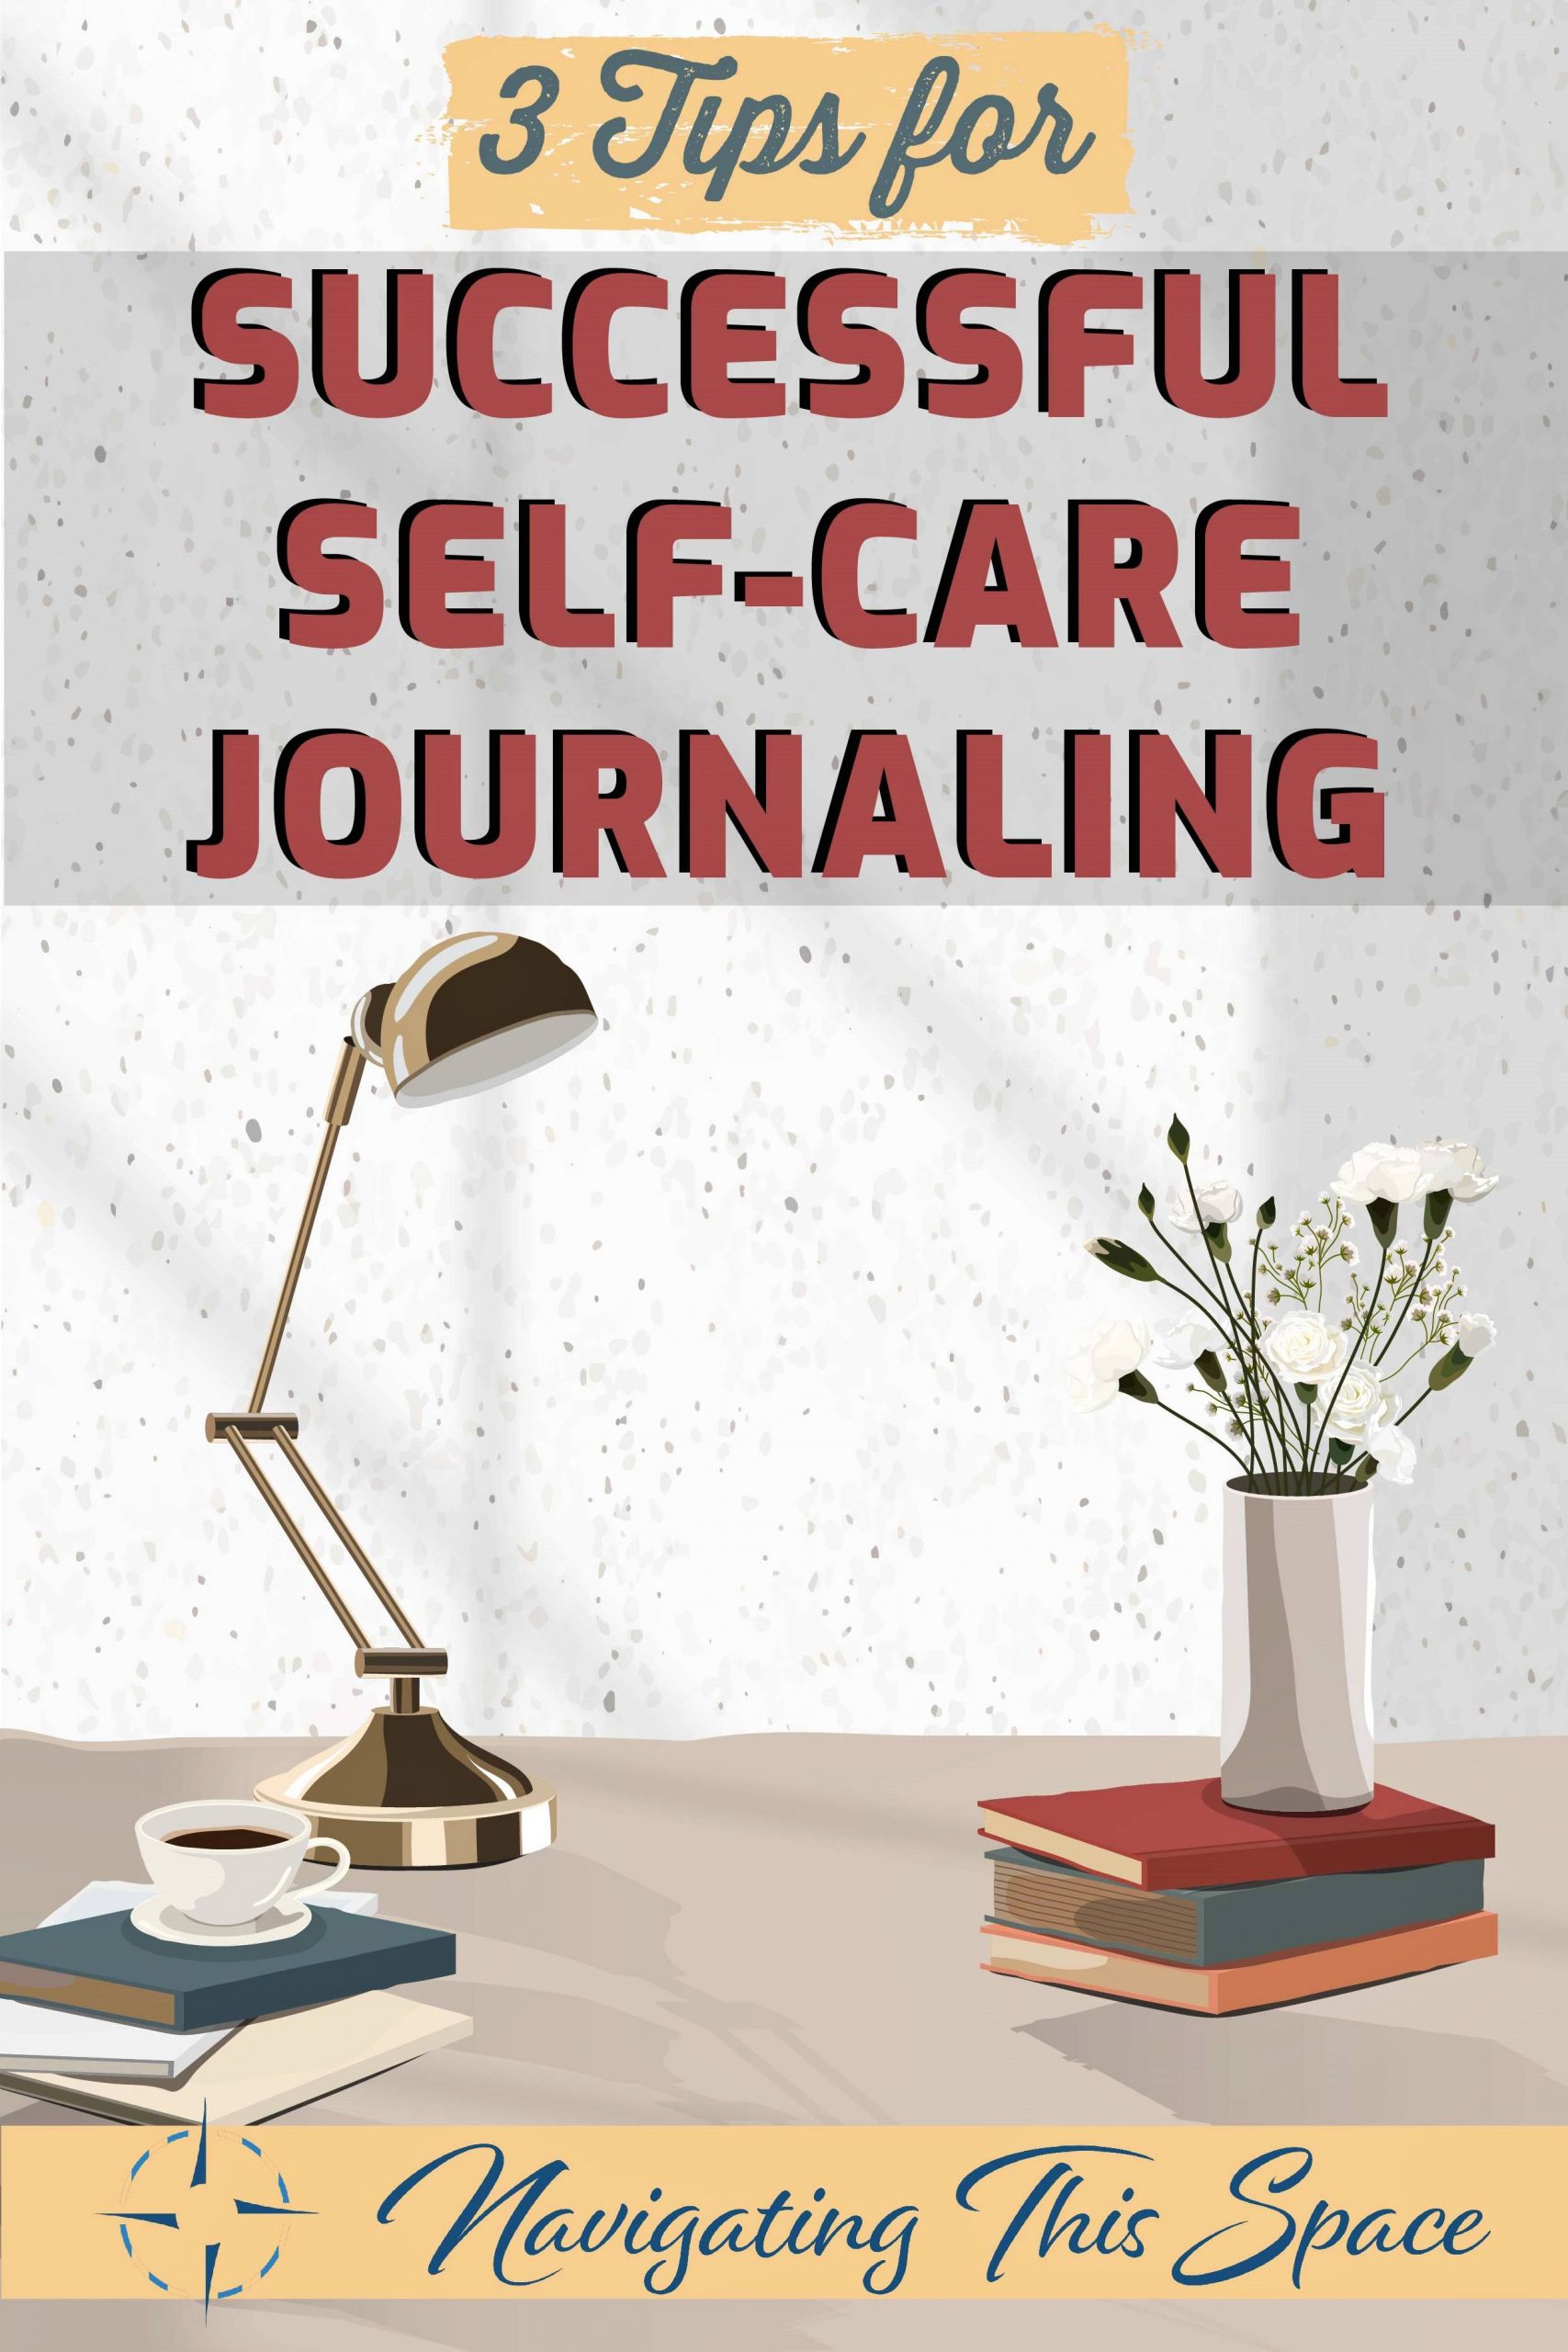 3 Tips for Successful Self-Care Journaling